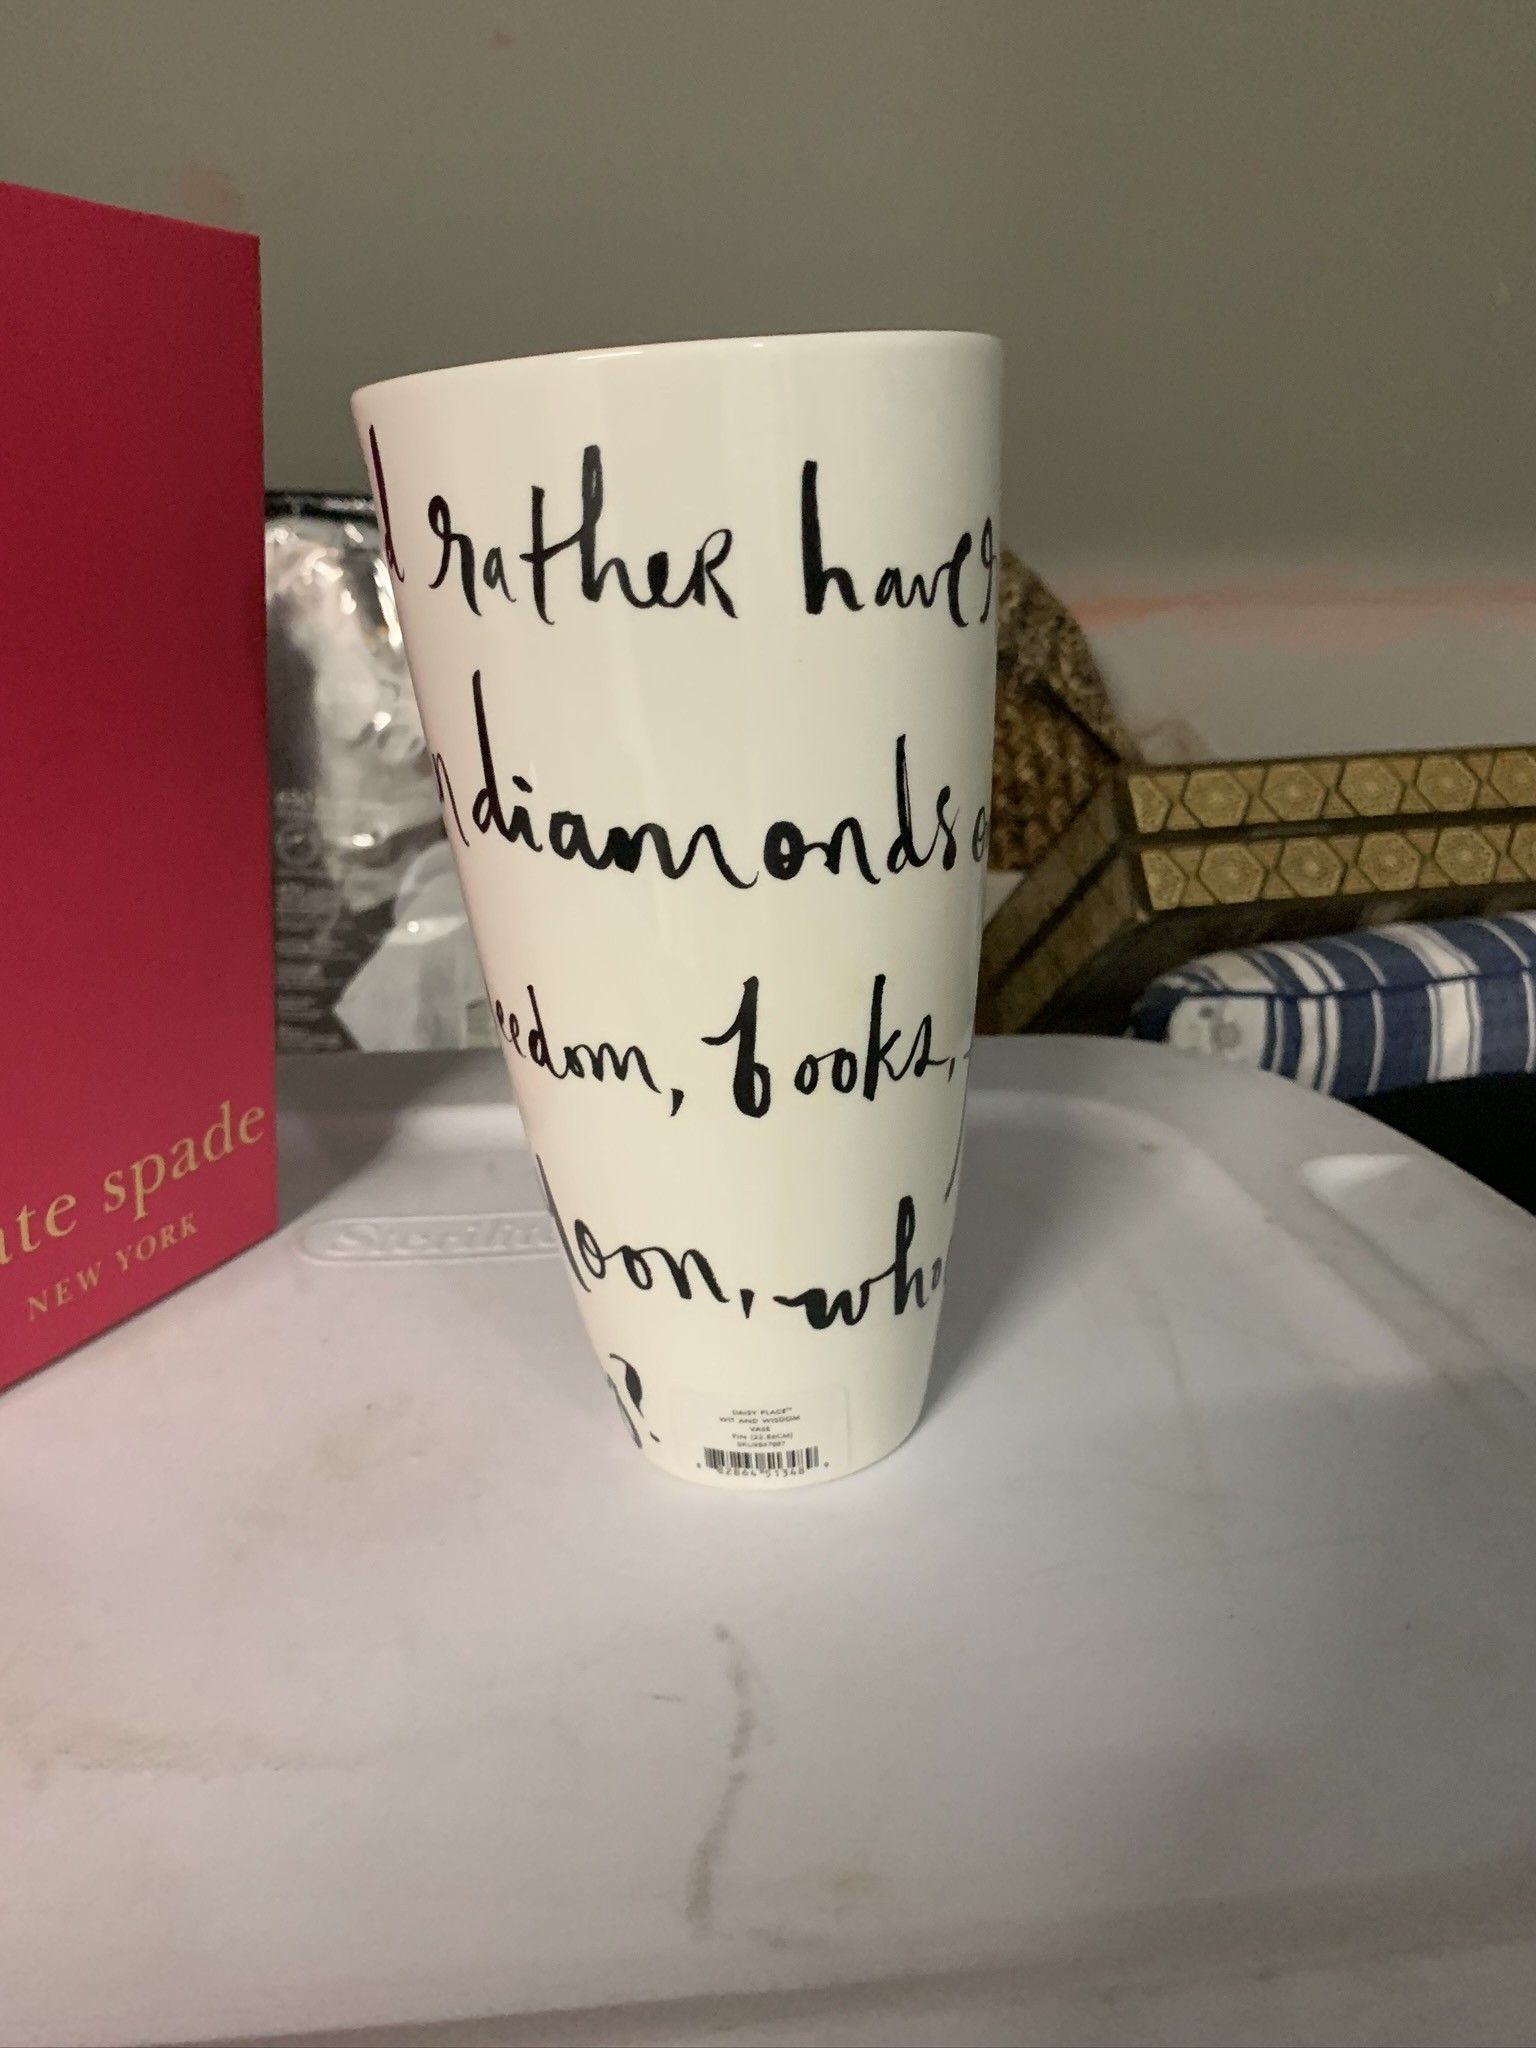 Kate Spade wit and wisdom Daisy Place Vase